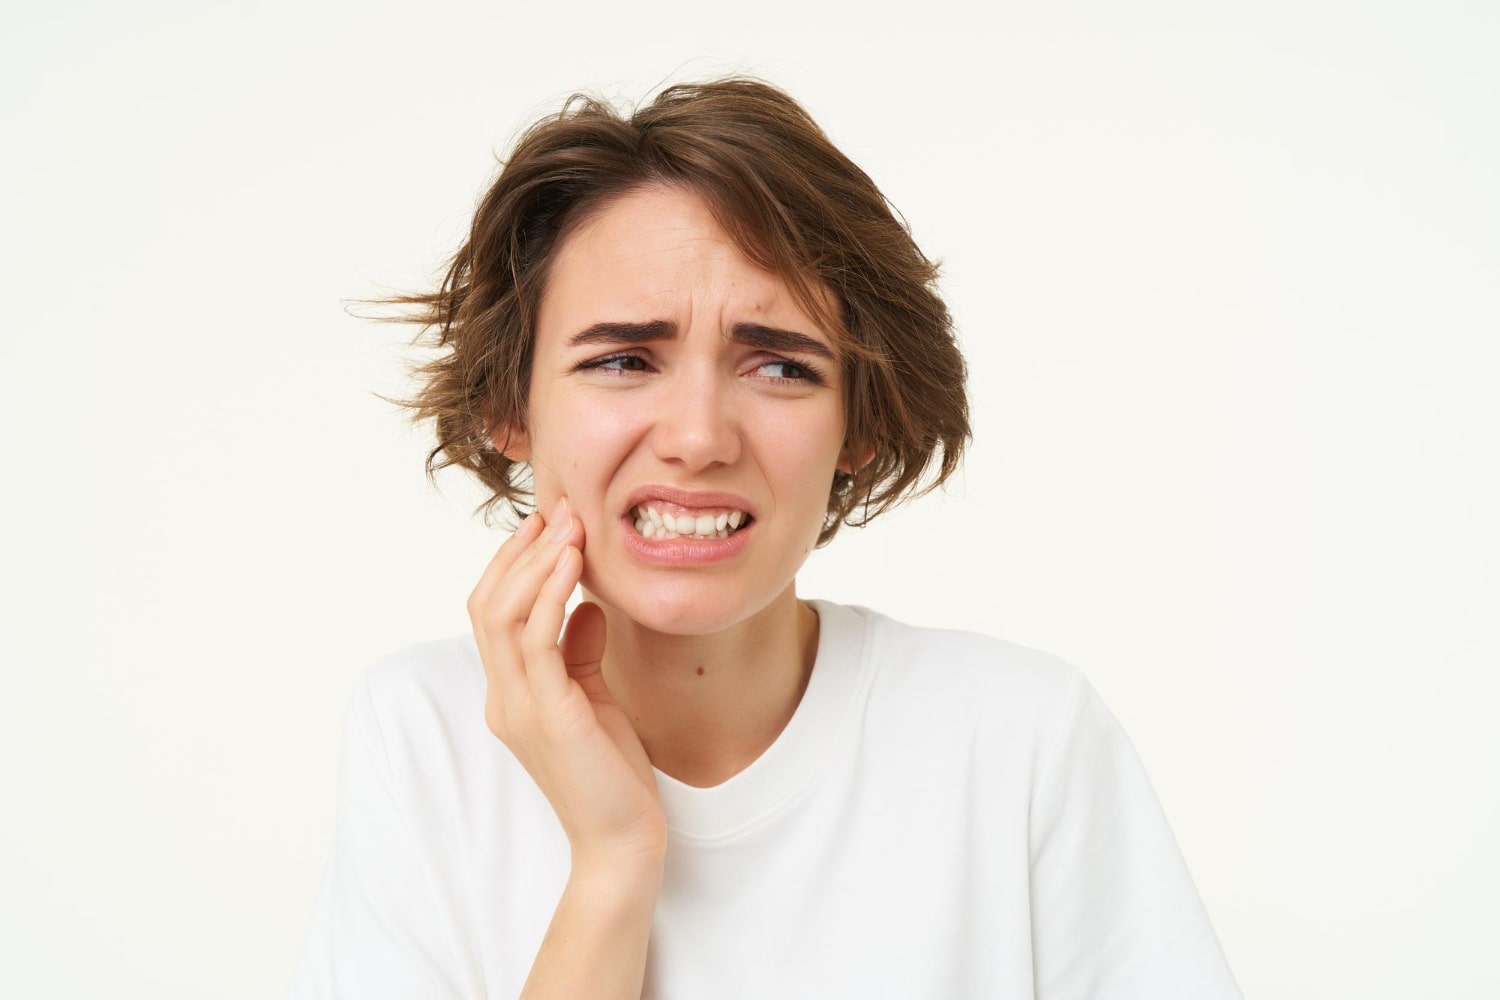 Close up of a woman with wisdom teeth pain thinking if will my teeth straighten after wisdom teeth extraction